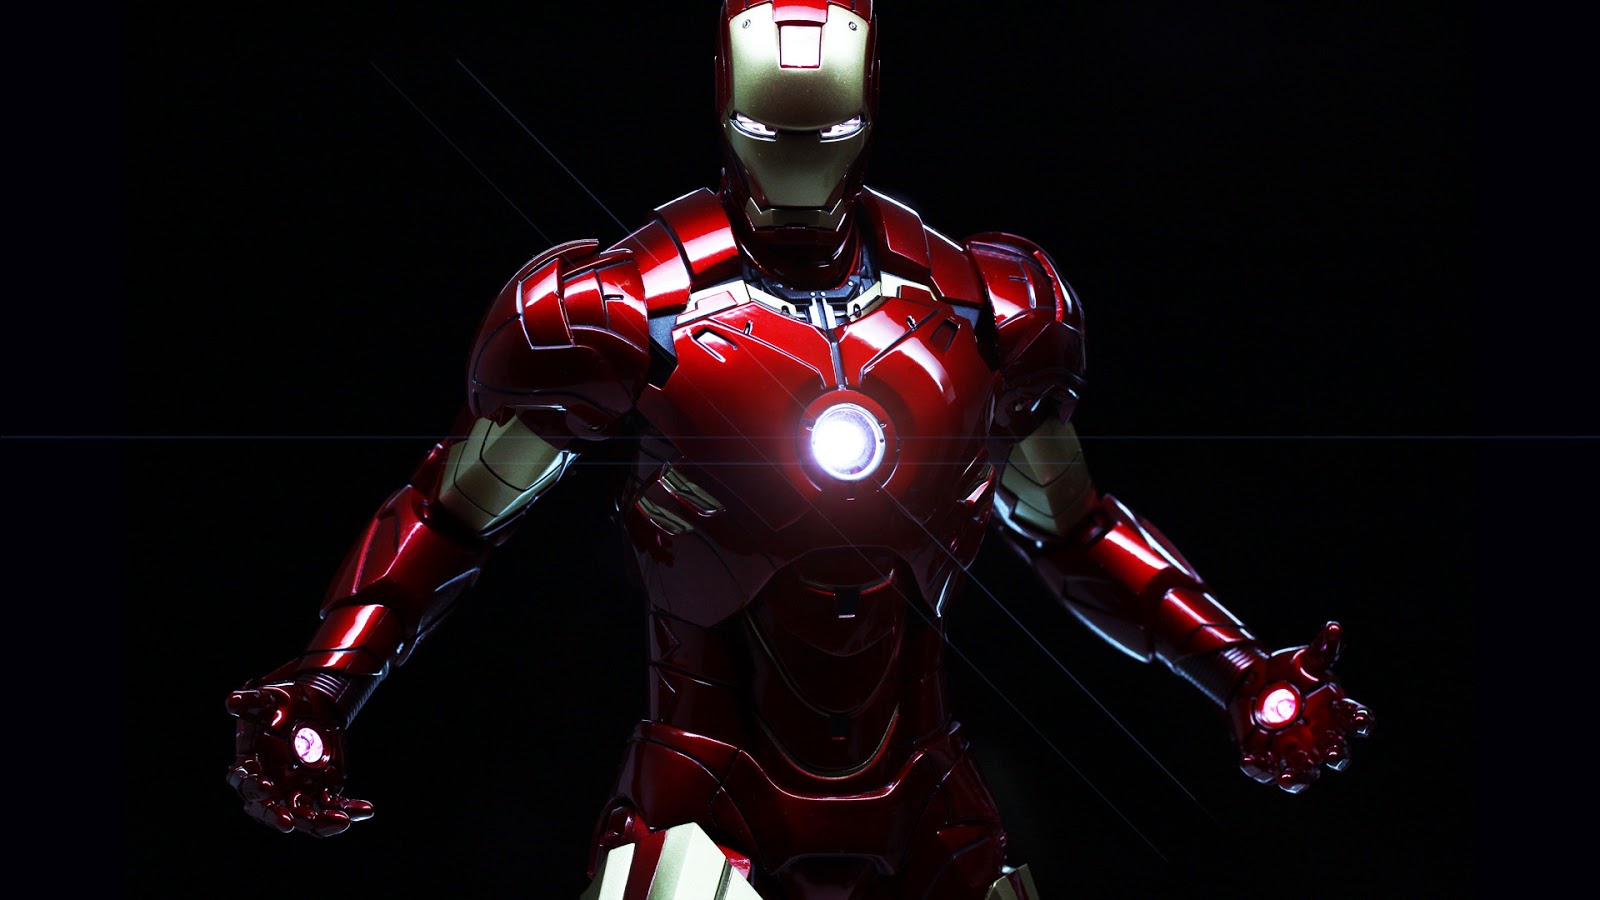 Iron Man 4: Robert Downey Jr. Says "No" To Sequel, "Yes" To Capt. America